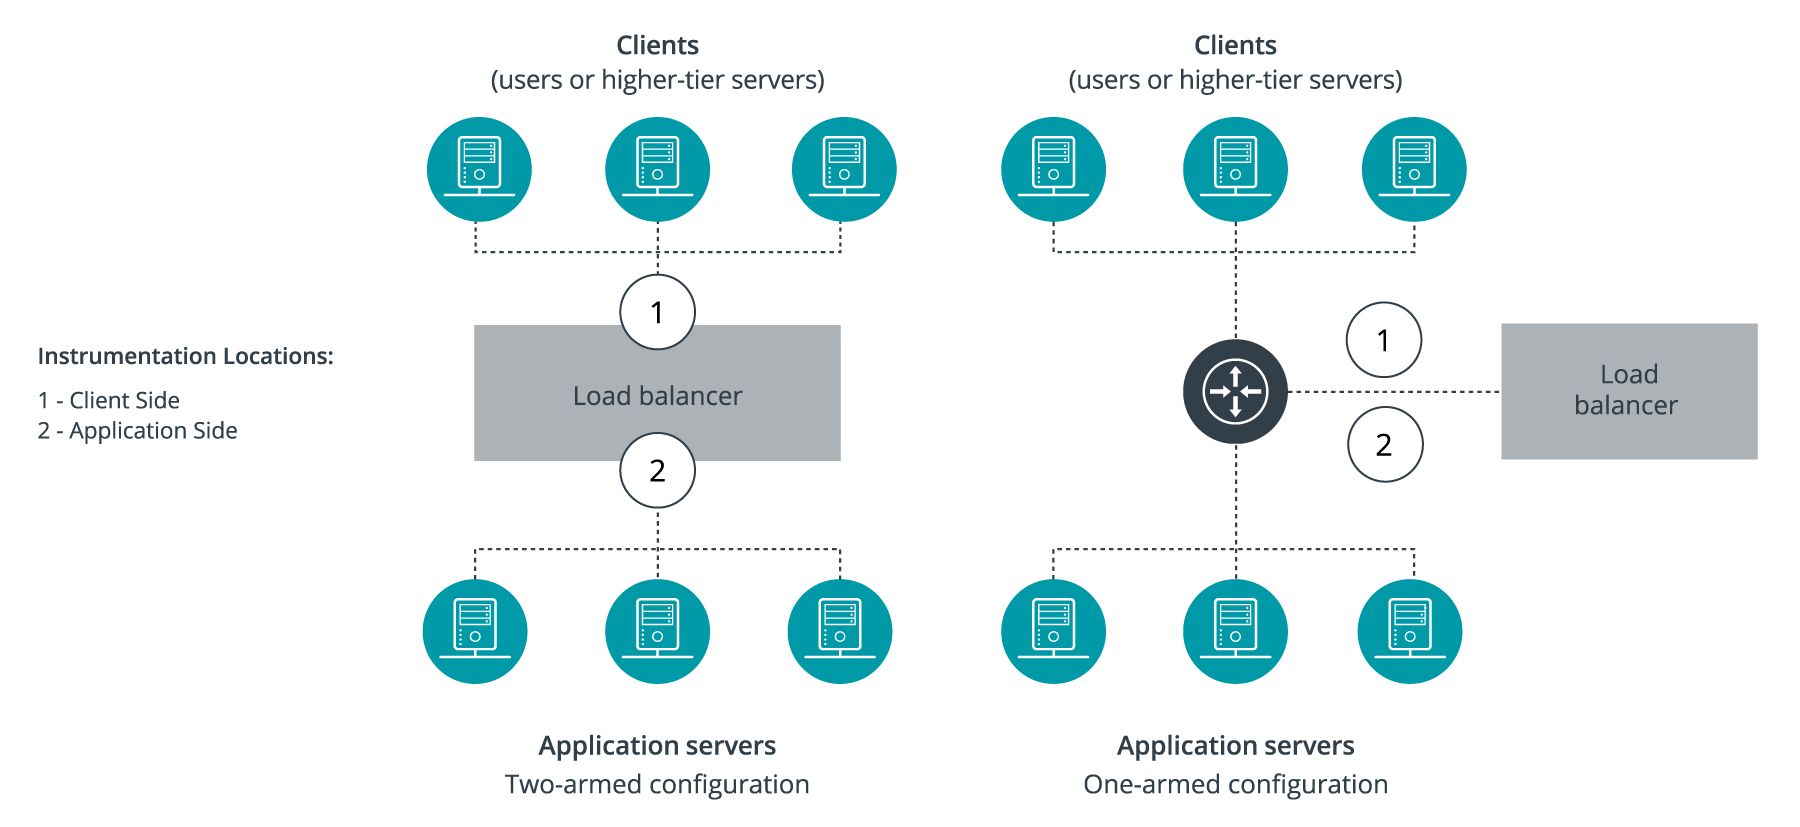 Remove Visibility Gaps and Elevate Performance in Any Load Balancing Environment